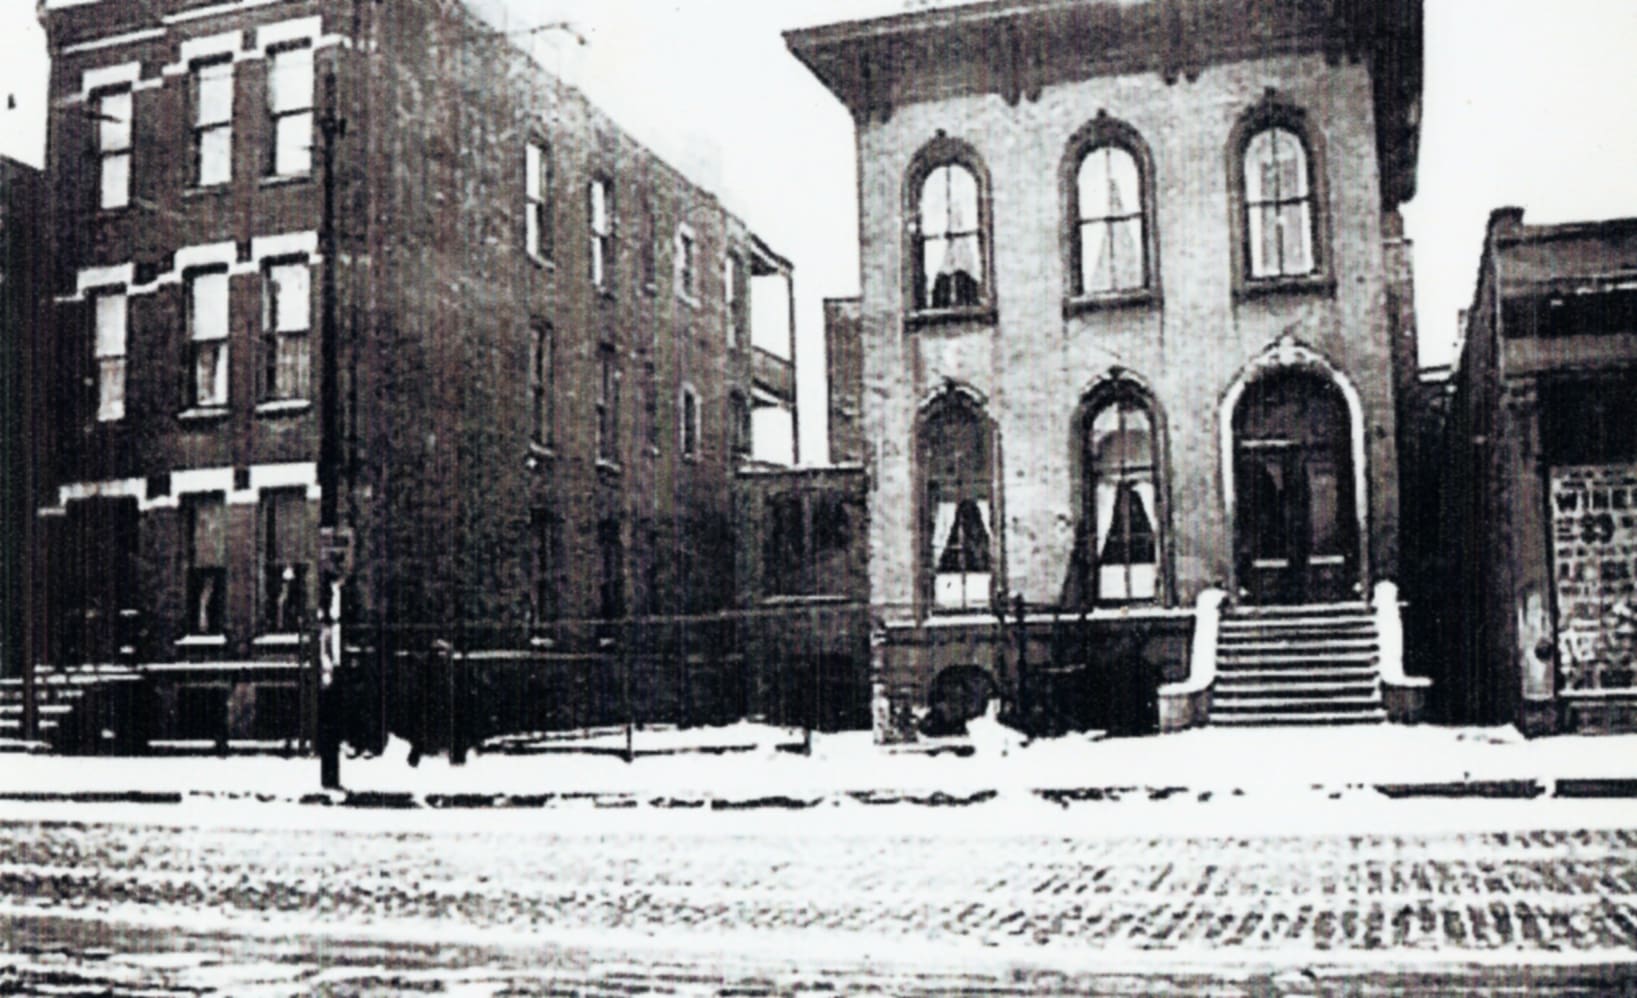 A black and white photo of two buildings in the snow.